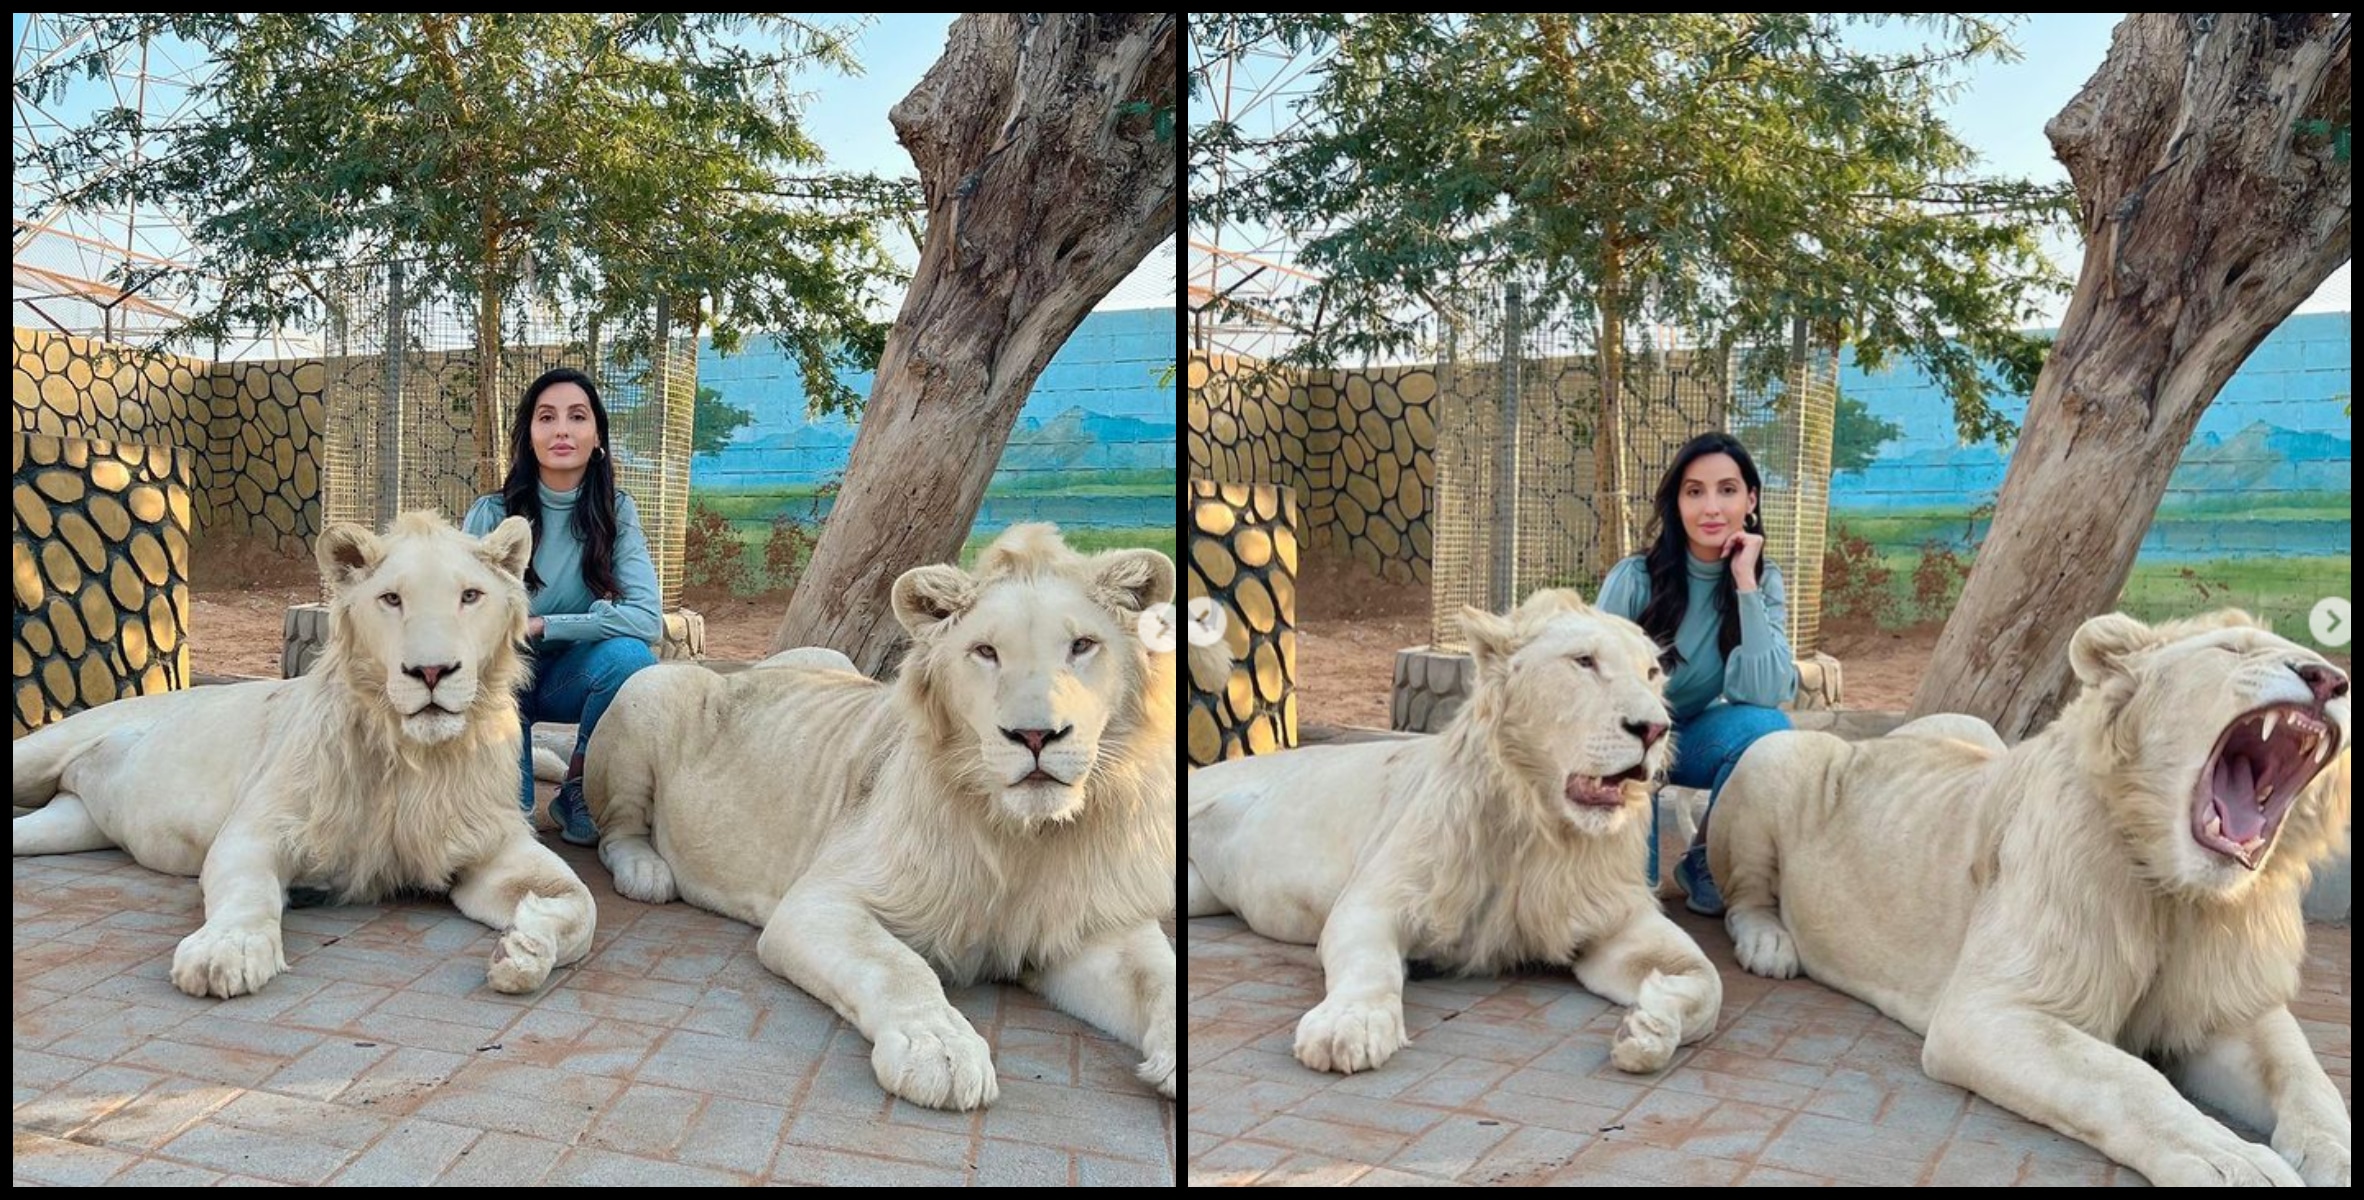 Nora Fatehi posed with lions too.